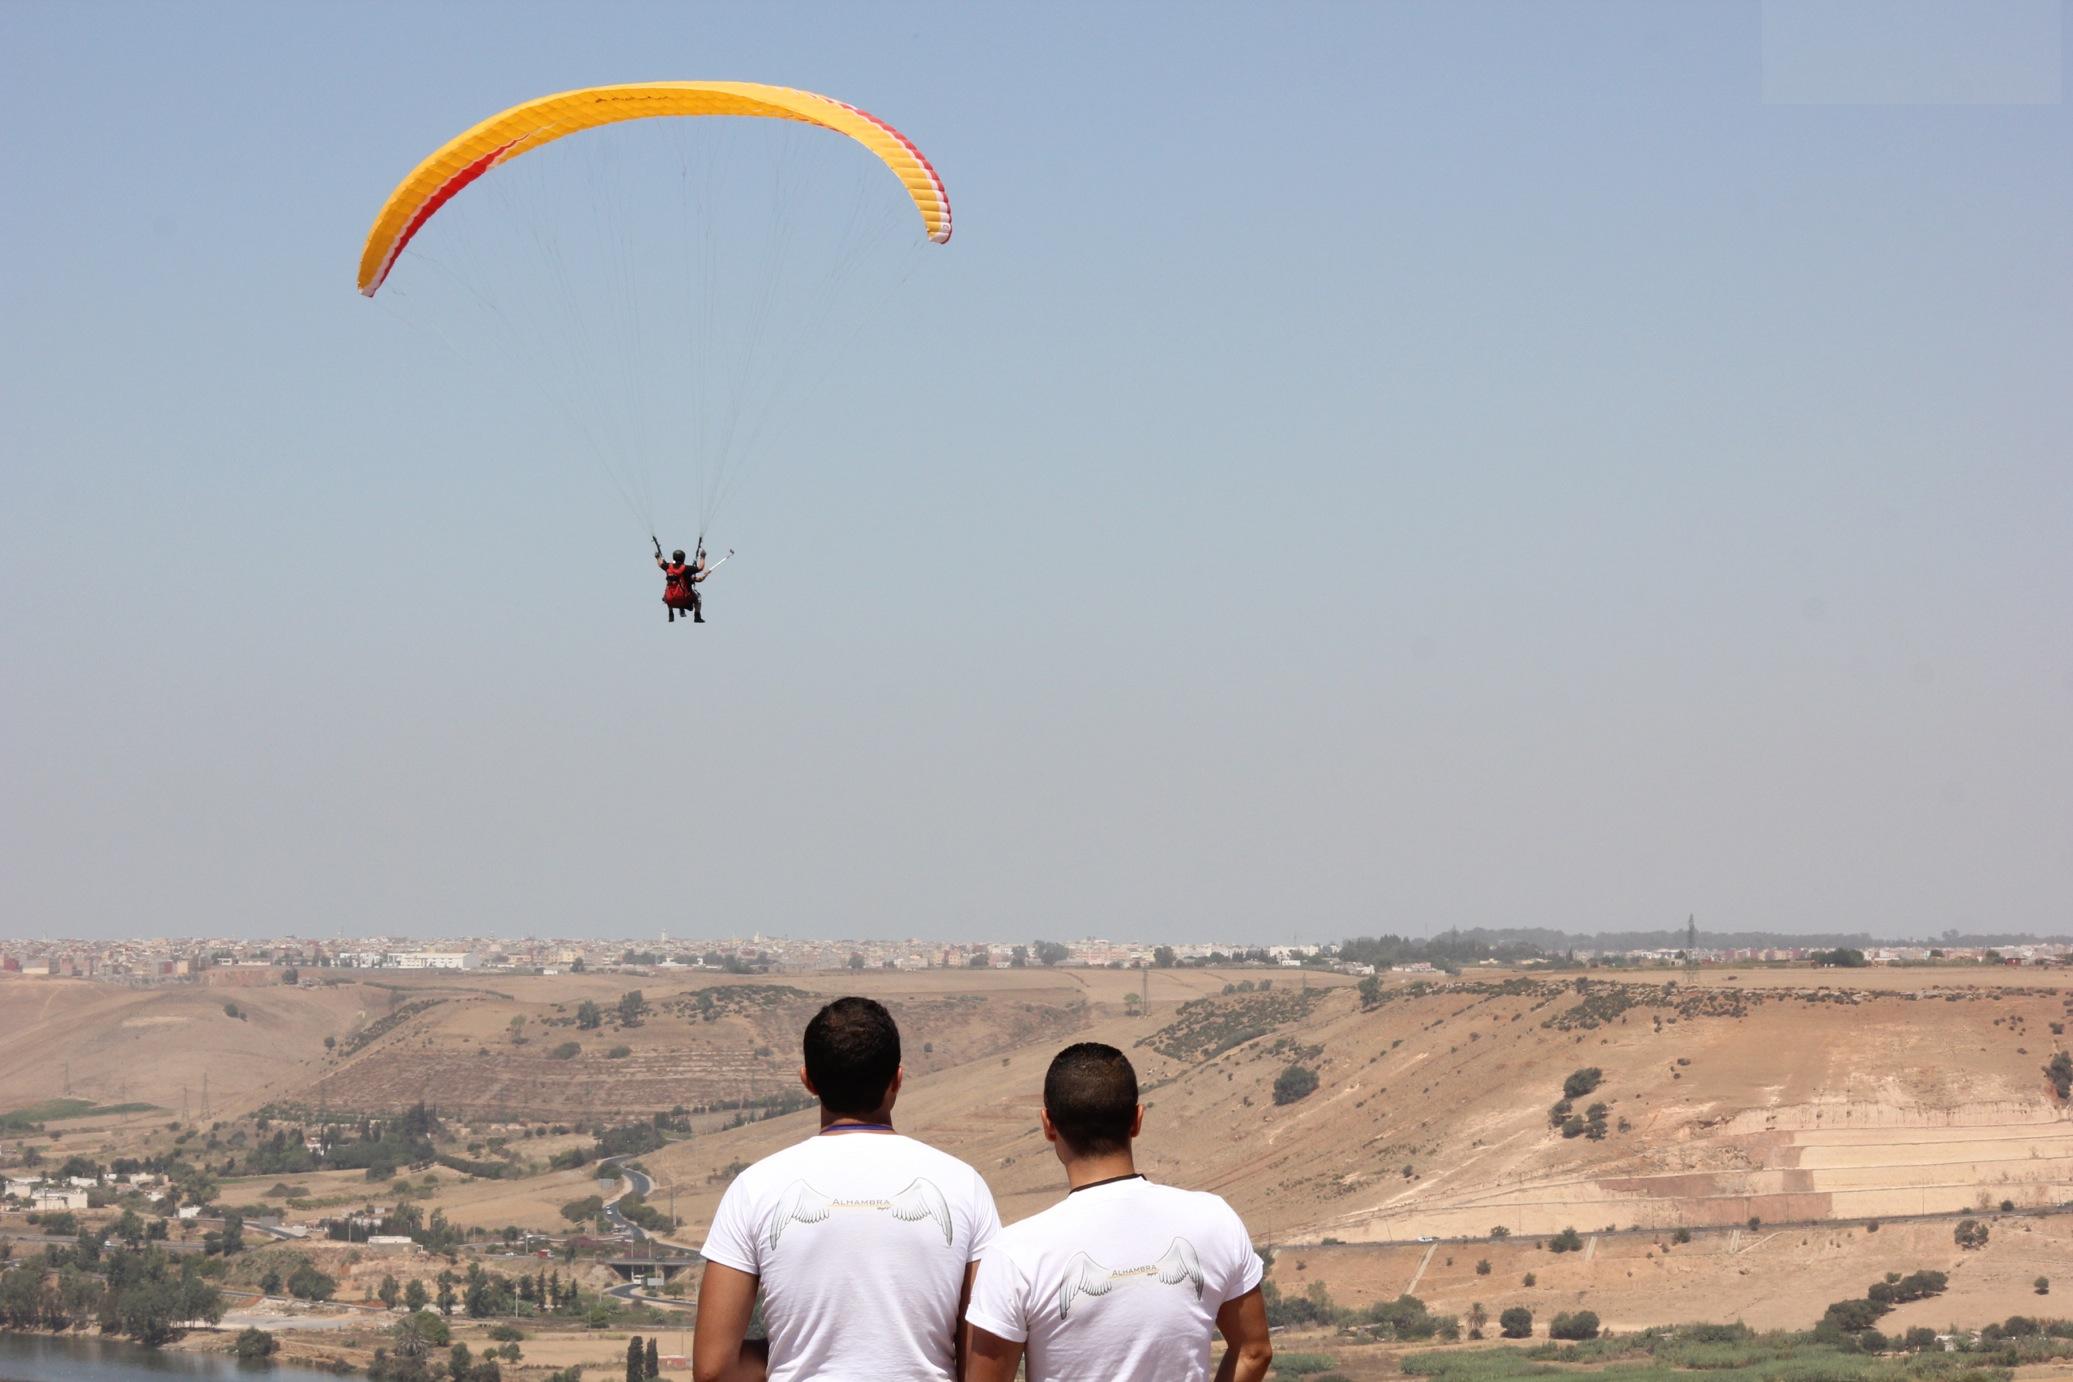 Marrakech Excurions, Microlight and Paragliding in Marrakech